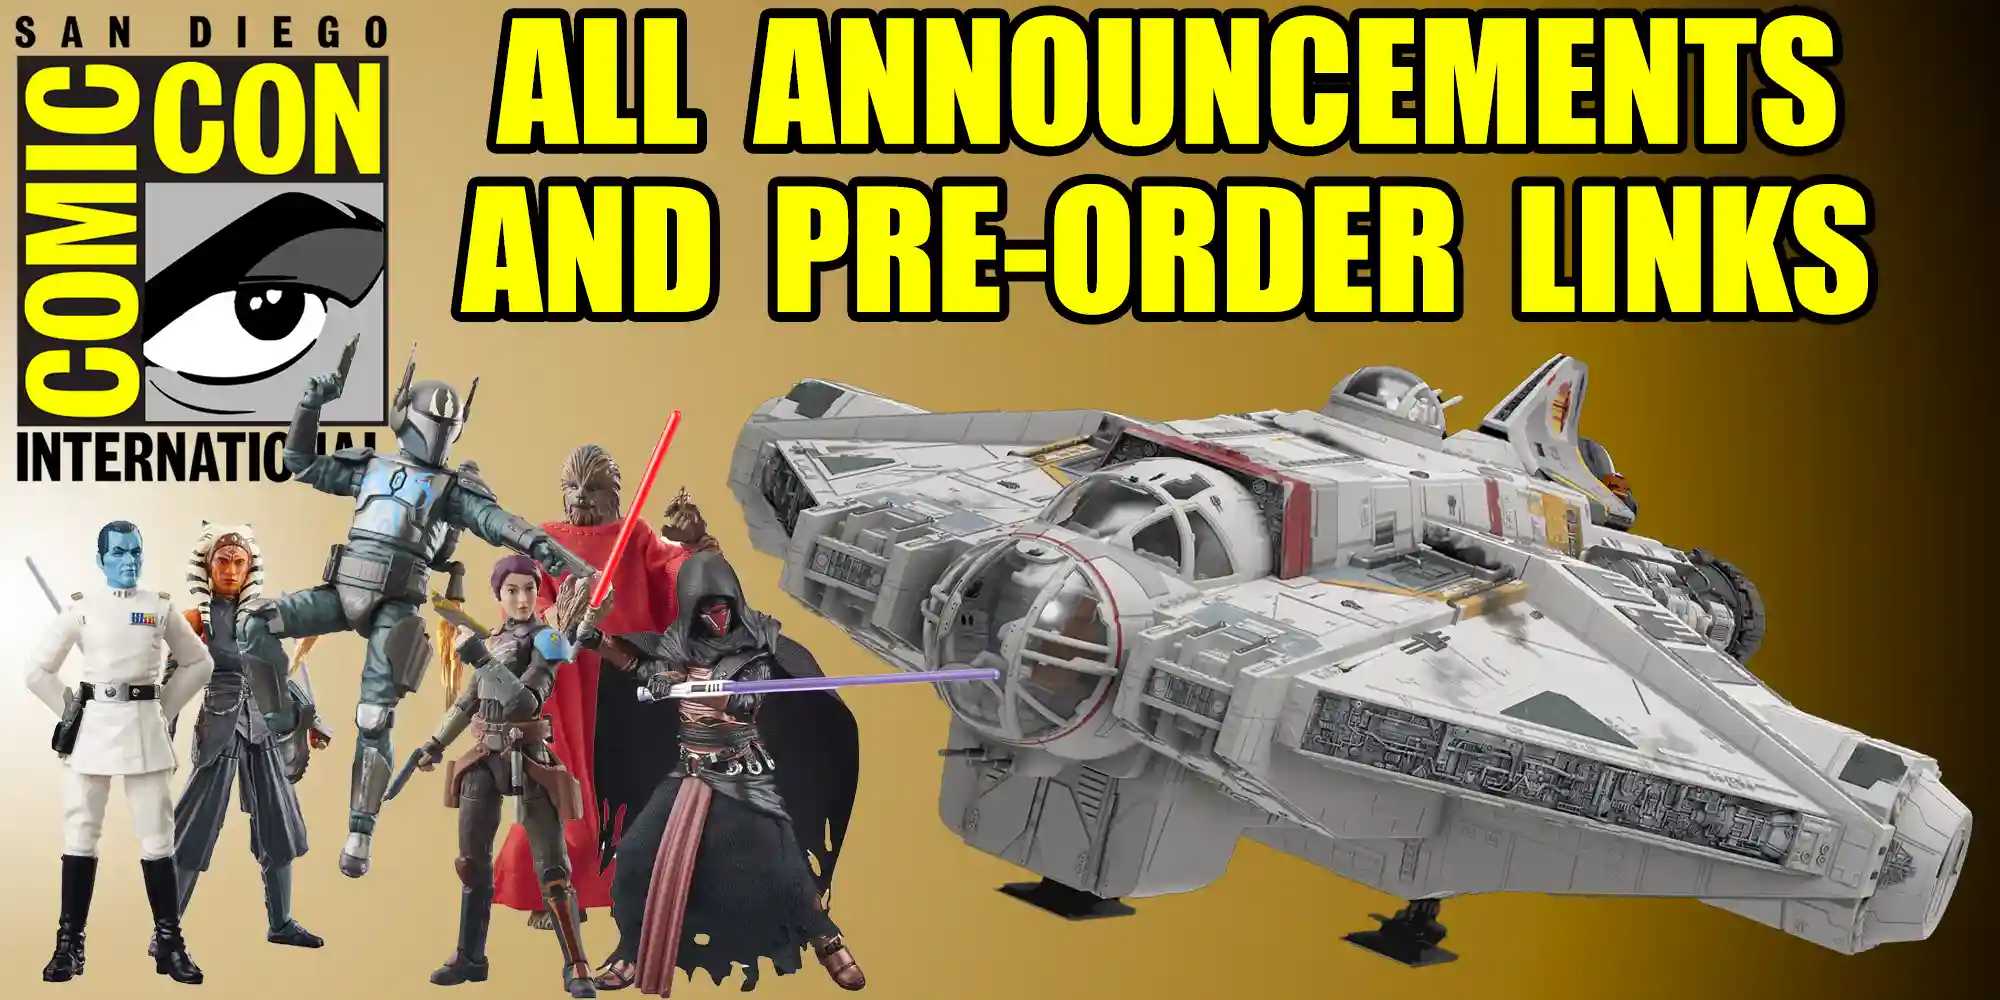 All Announcements From San Diego Comic Con And Pre-Order Links!